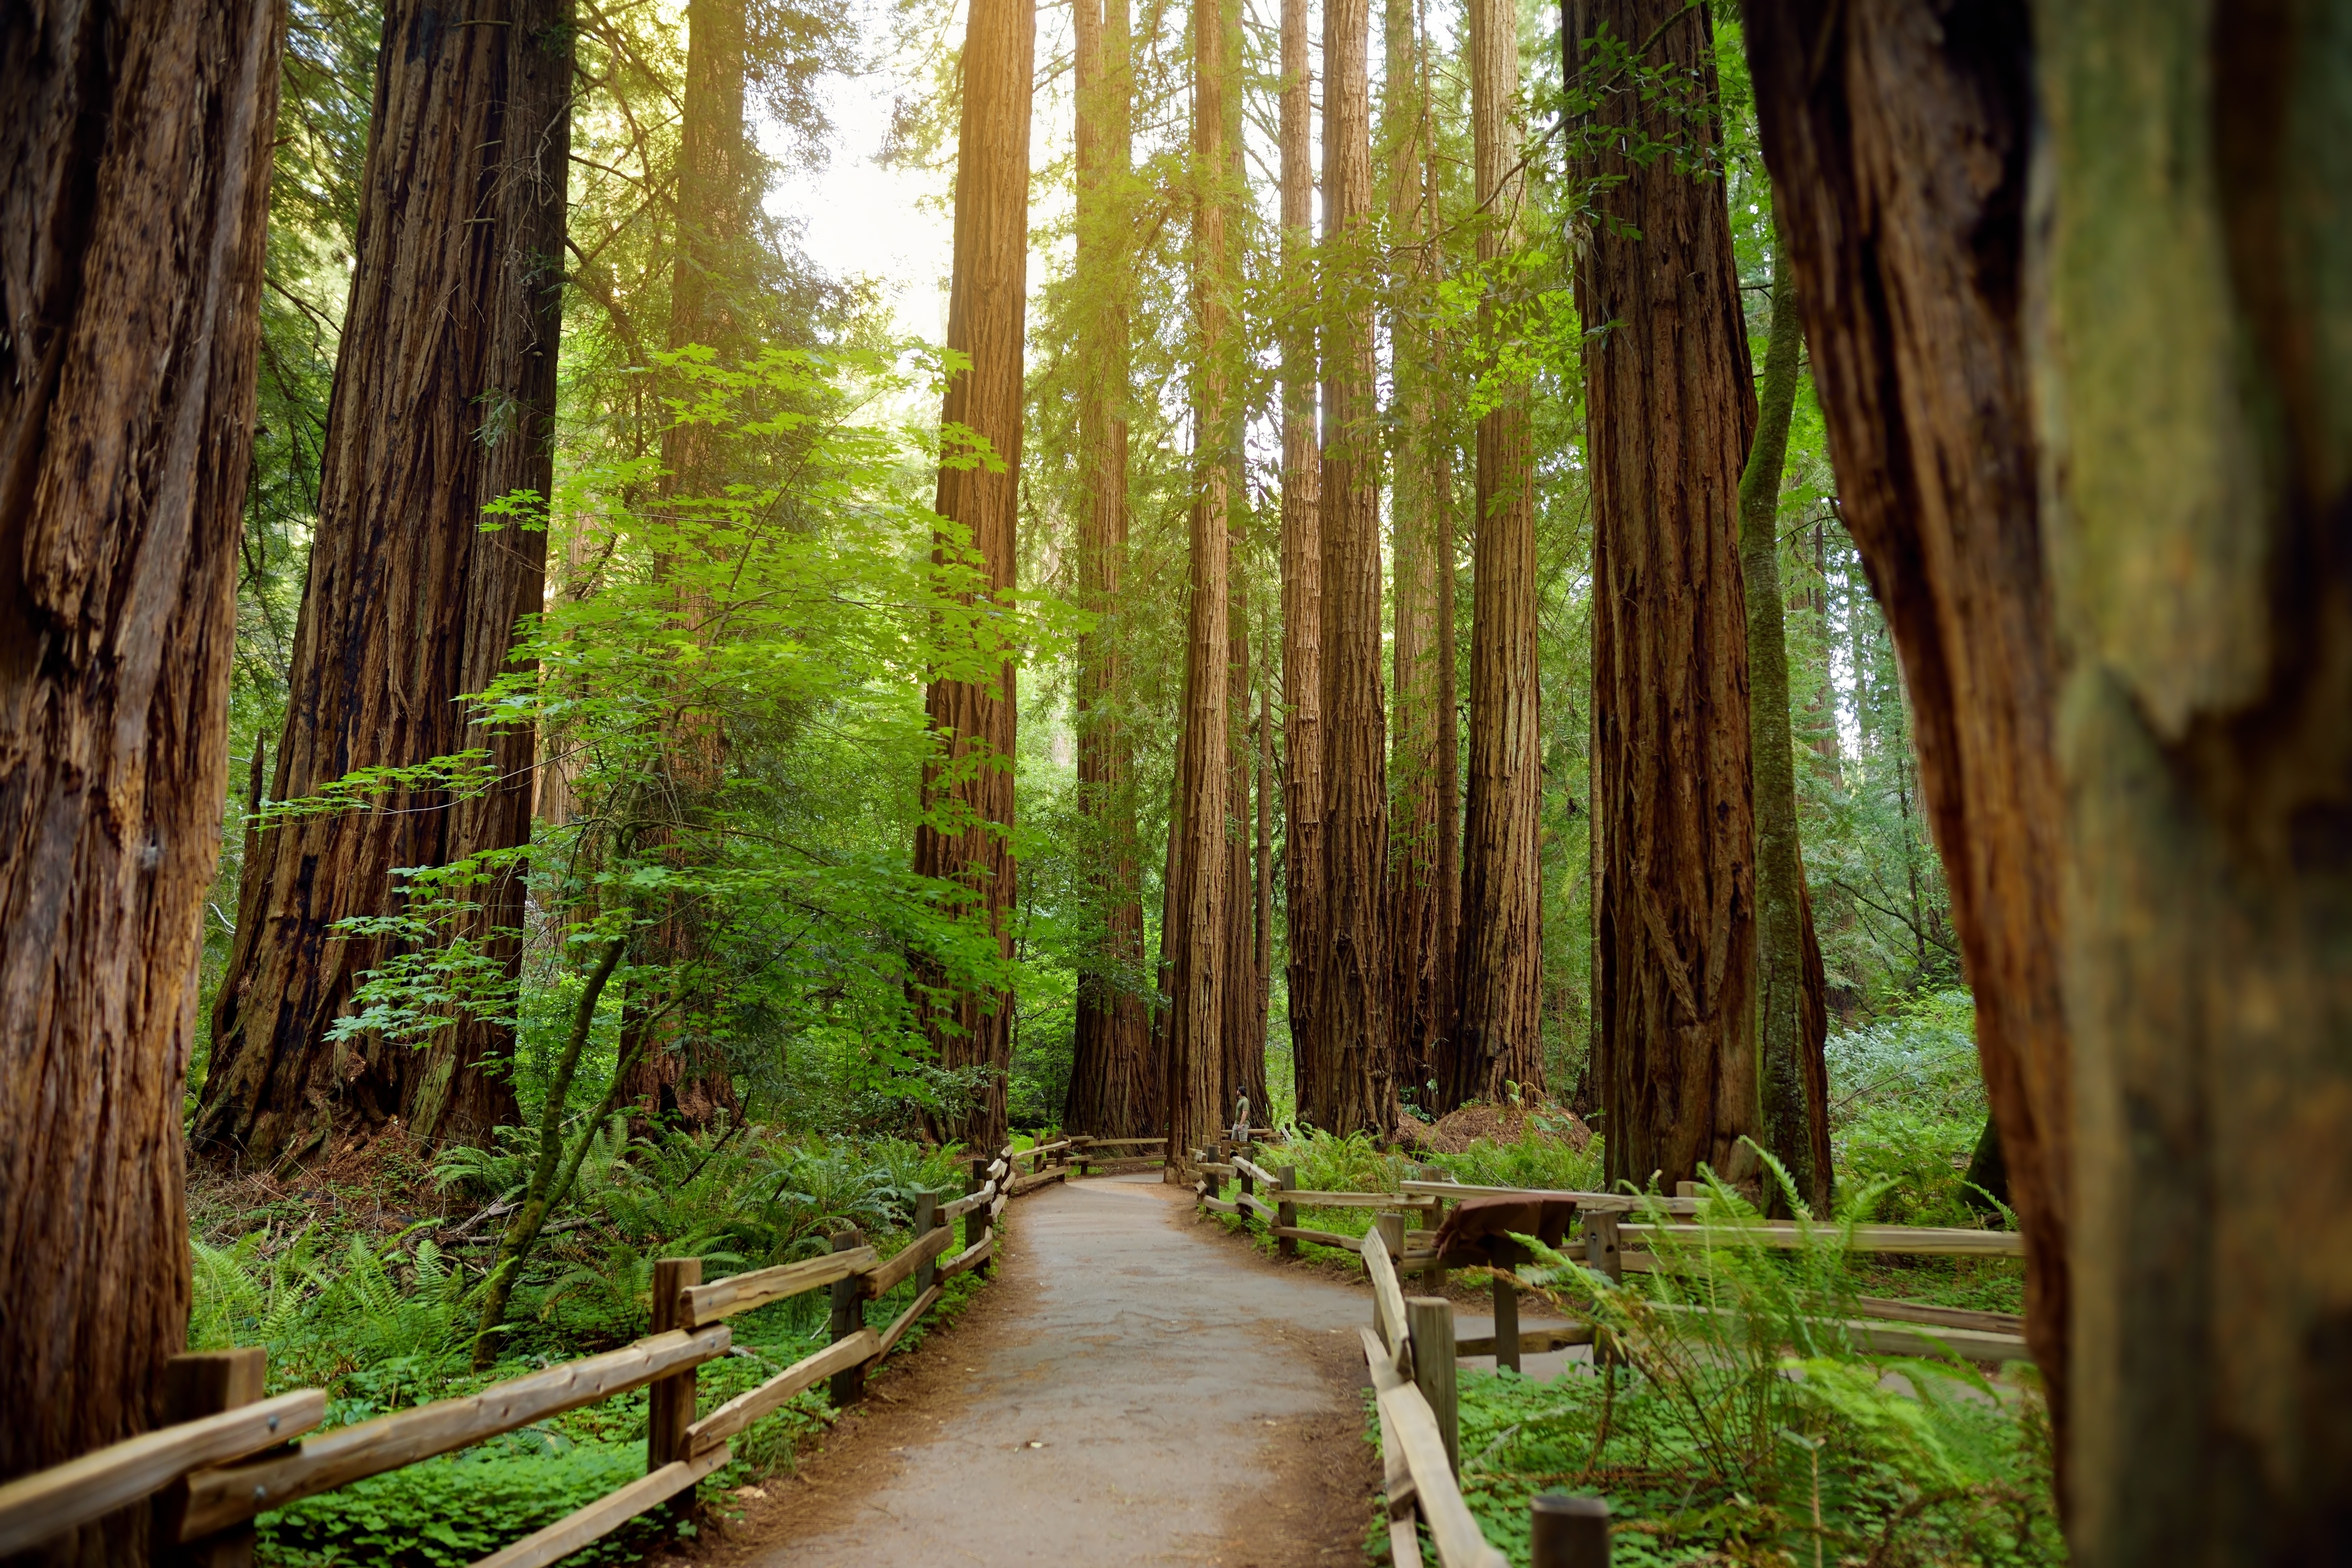 How to Beat the Crowds at Muir Woods | Via Magazine